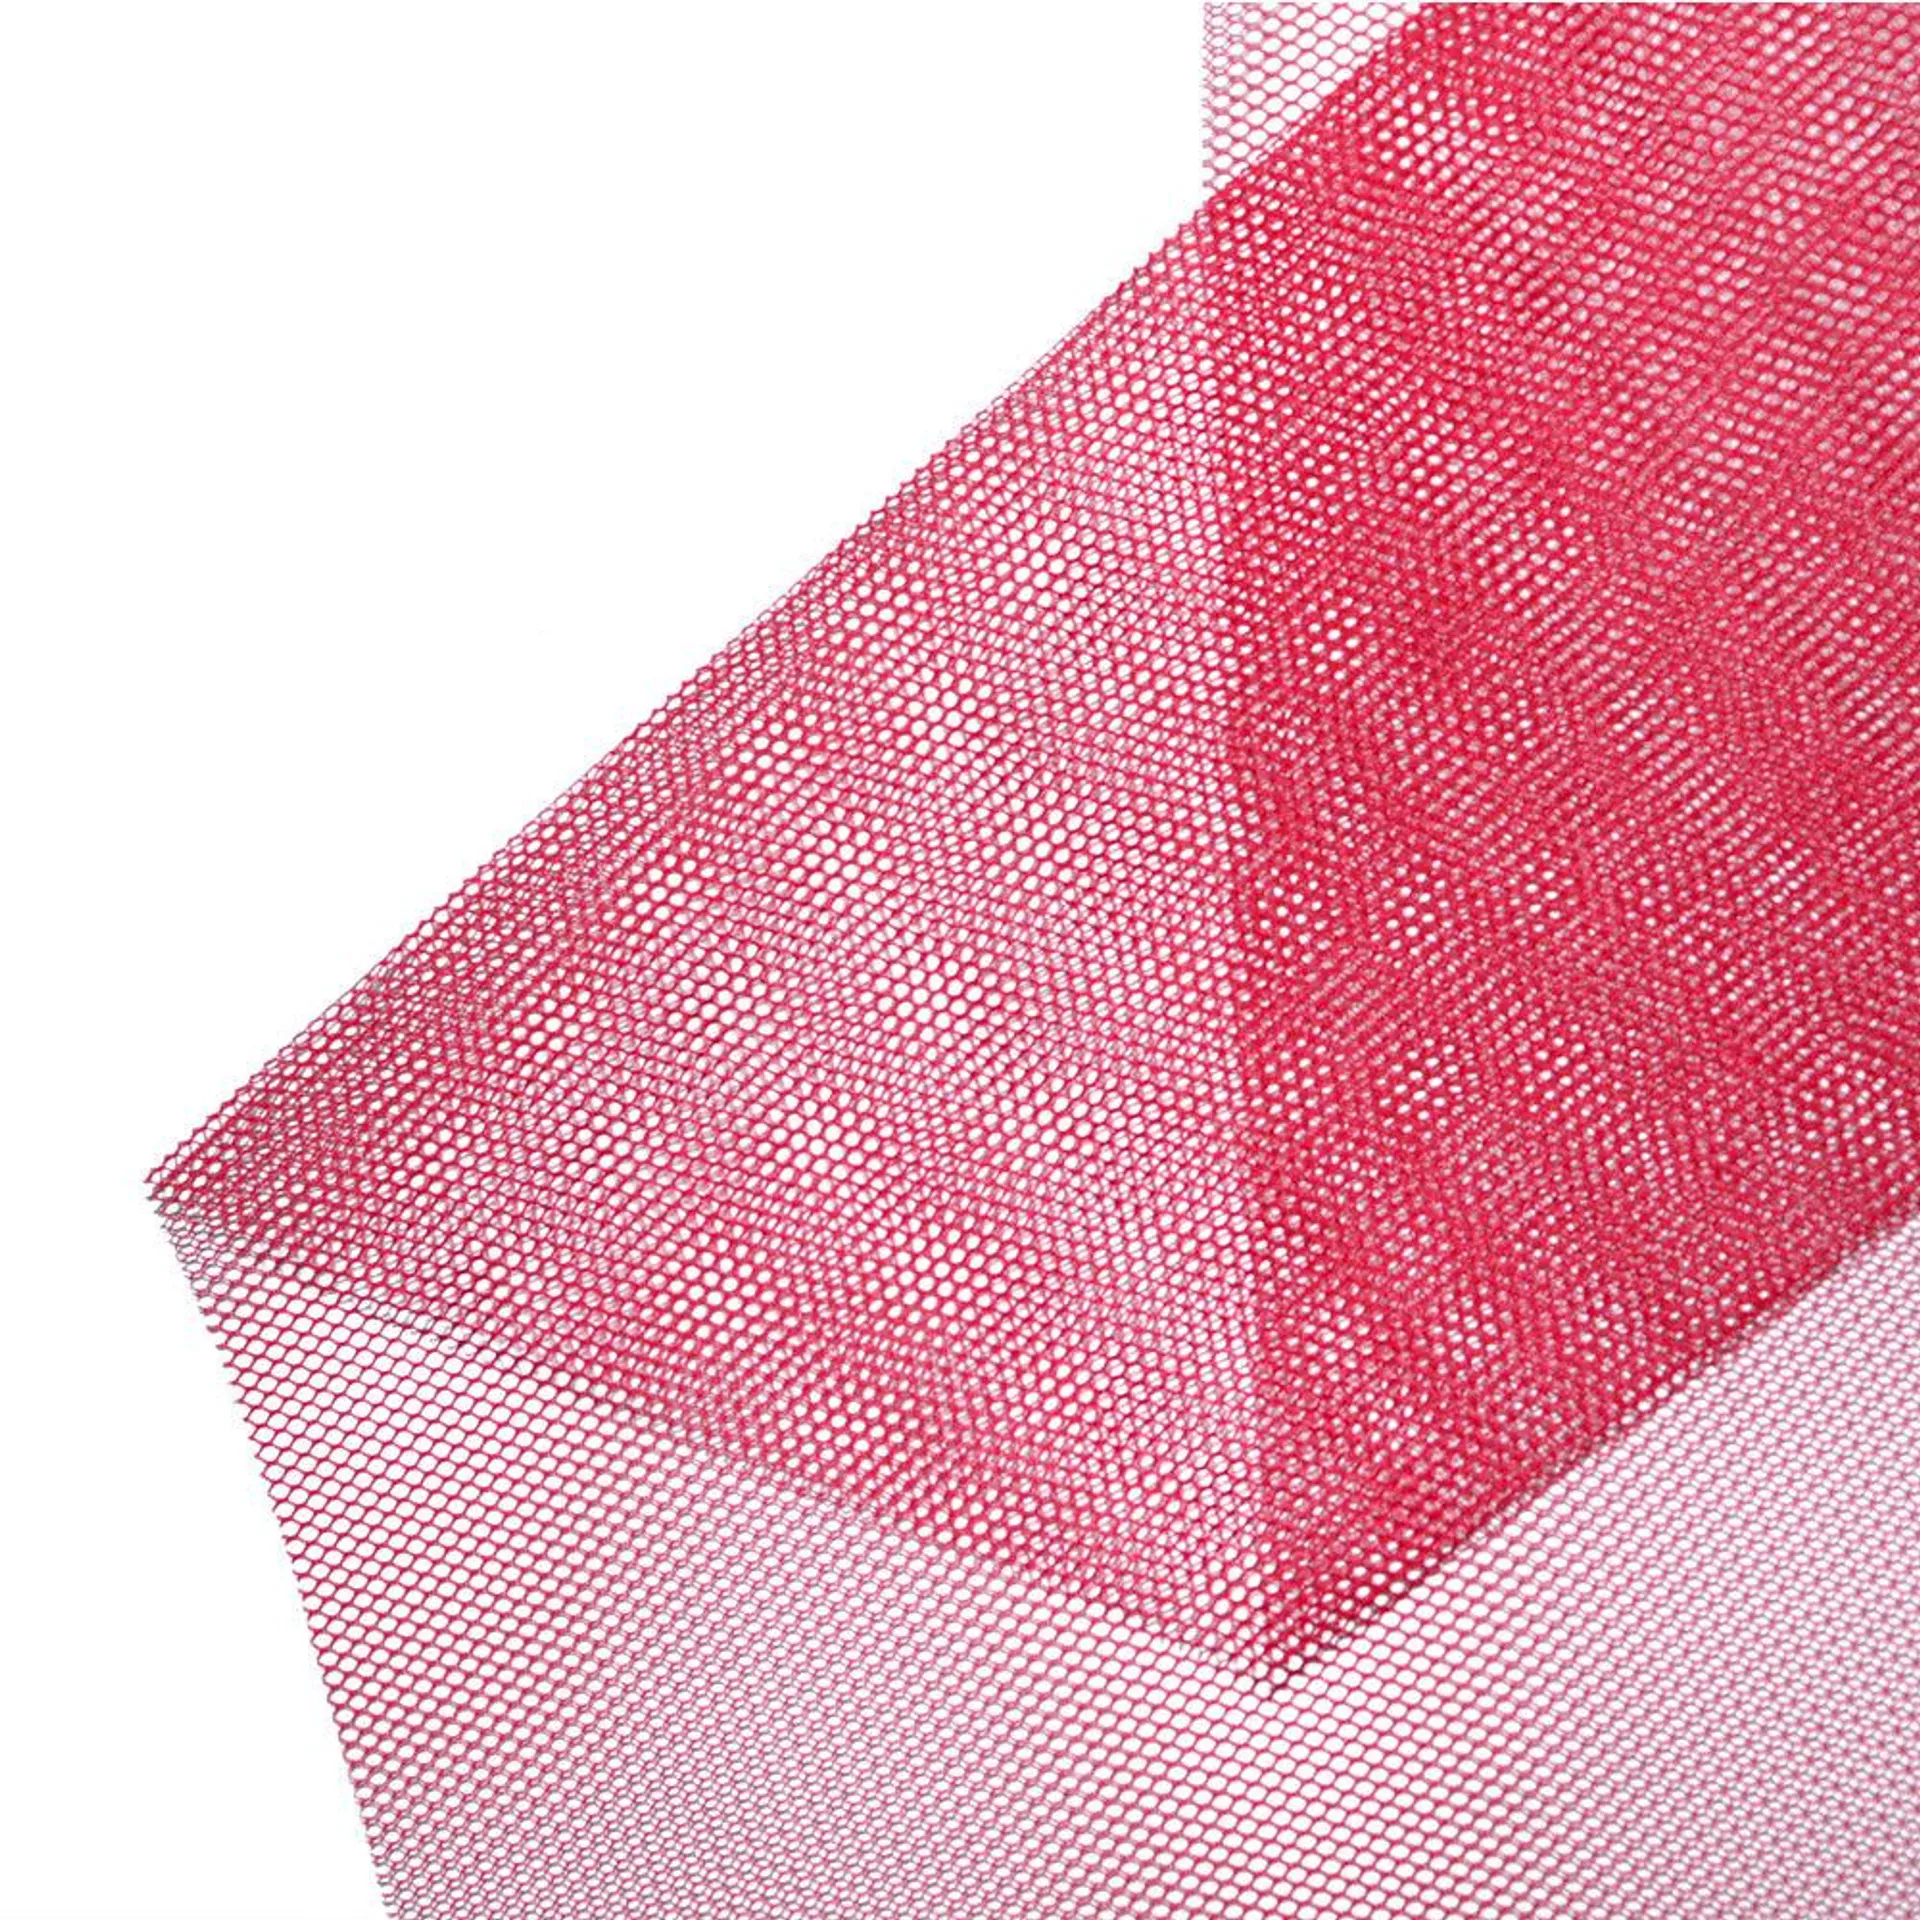 100% Polyester Netting, Red- Width 140cm